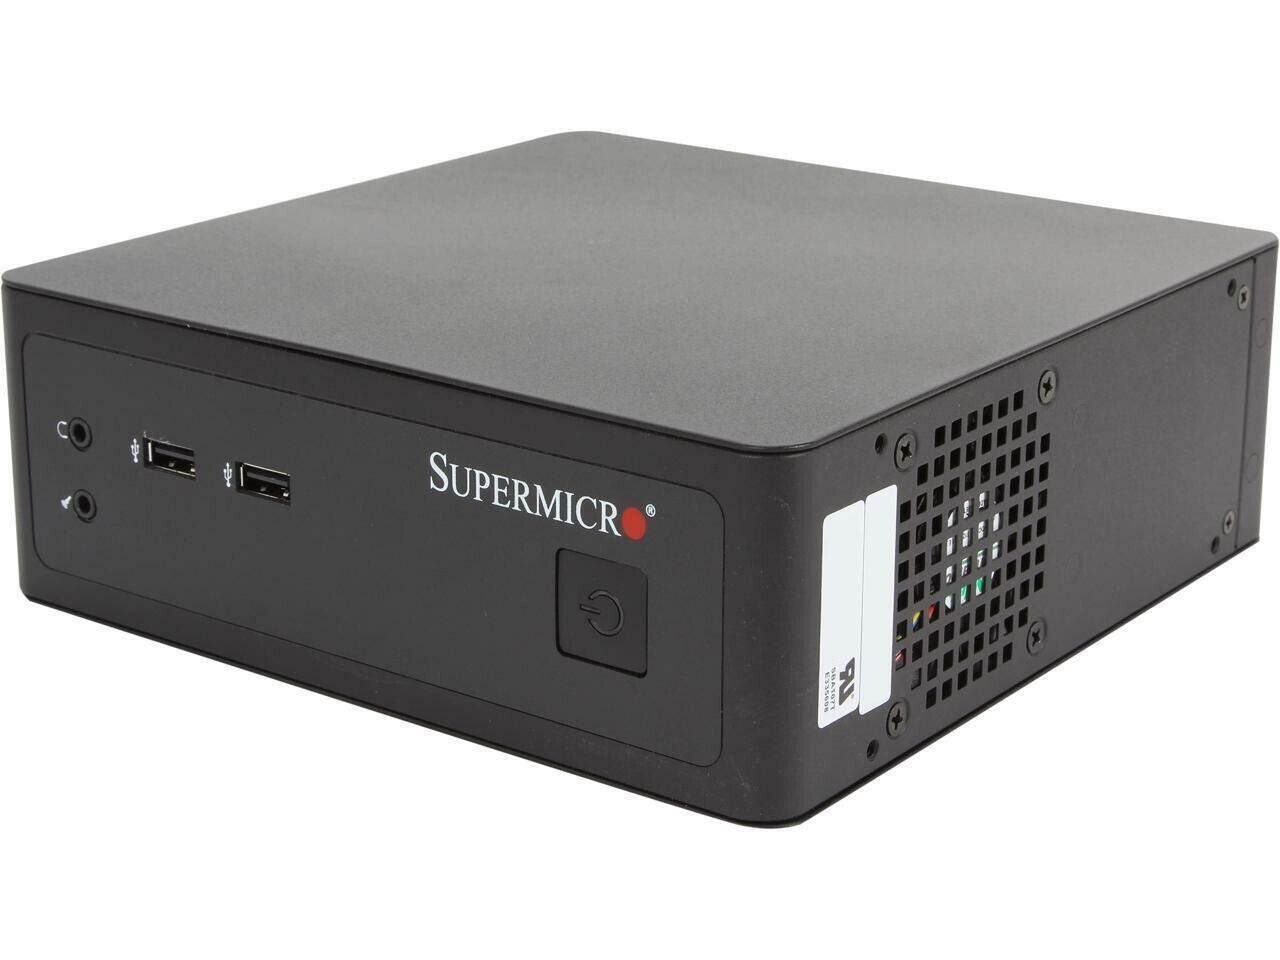 Supermicro SYS-1017A-MP Mini-ITX Atom System, NEW, IN STOCK, 5 Year Warranty